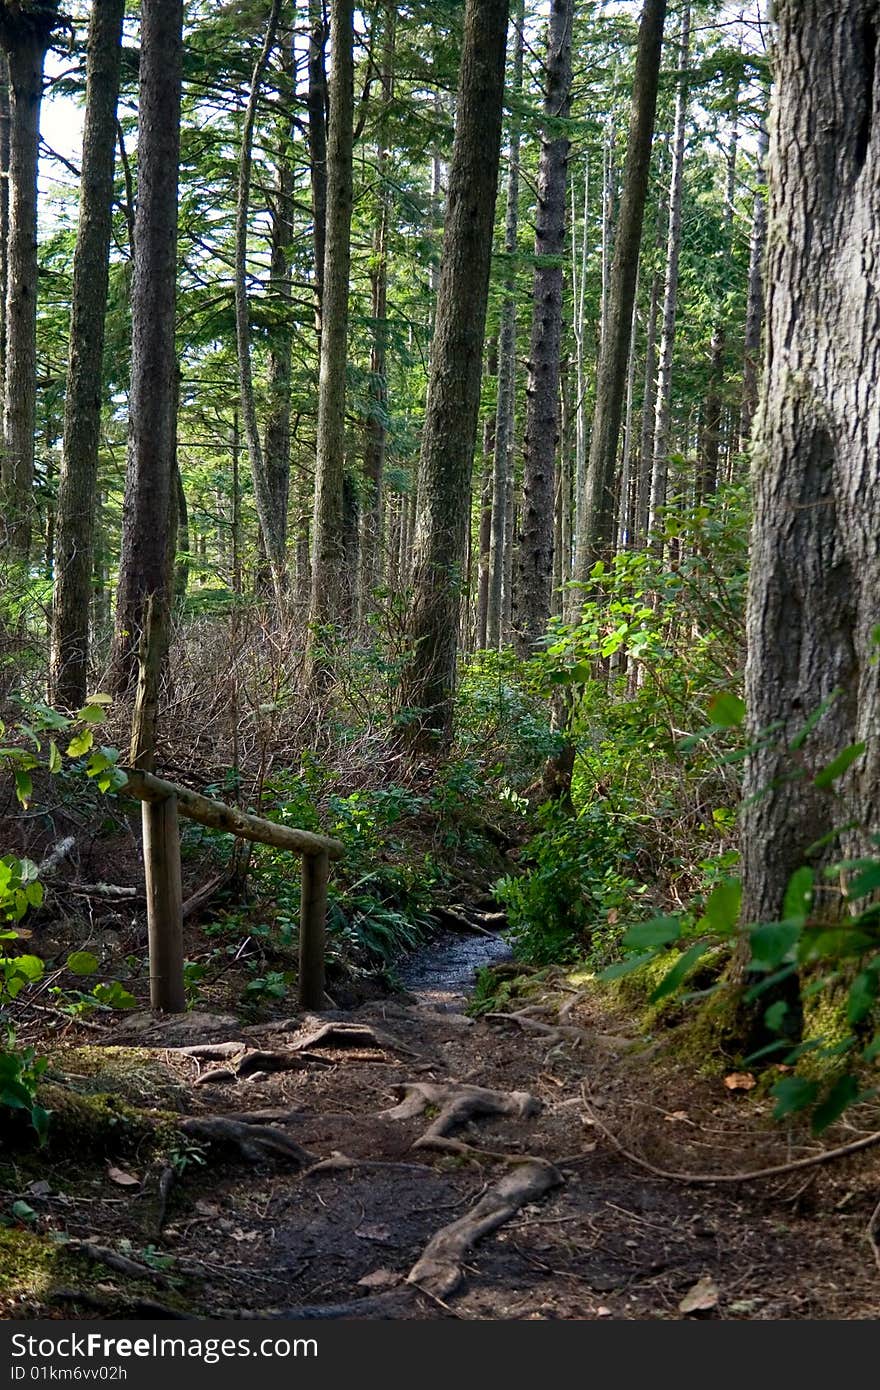 A pathway through the northwest rainforest leading to Cape Flattery, Washington, the northwestern-most point in the continental U.S. A pathway through the northwest rainforest leading to Cape Flattery, Washington, the northwestern-most point in the continental U.S.